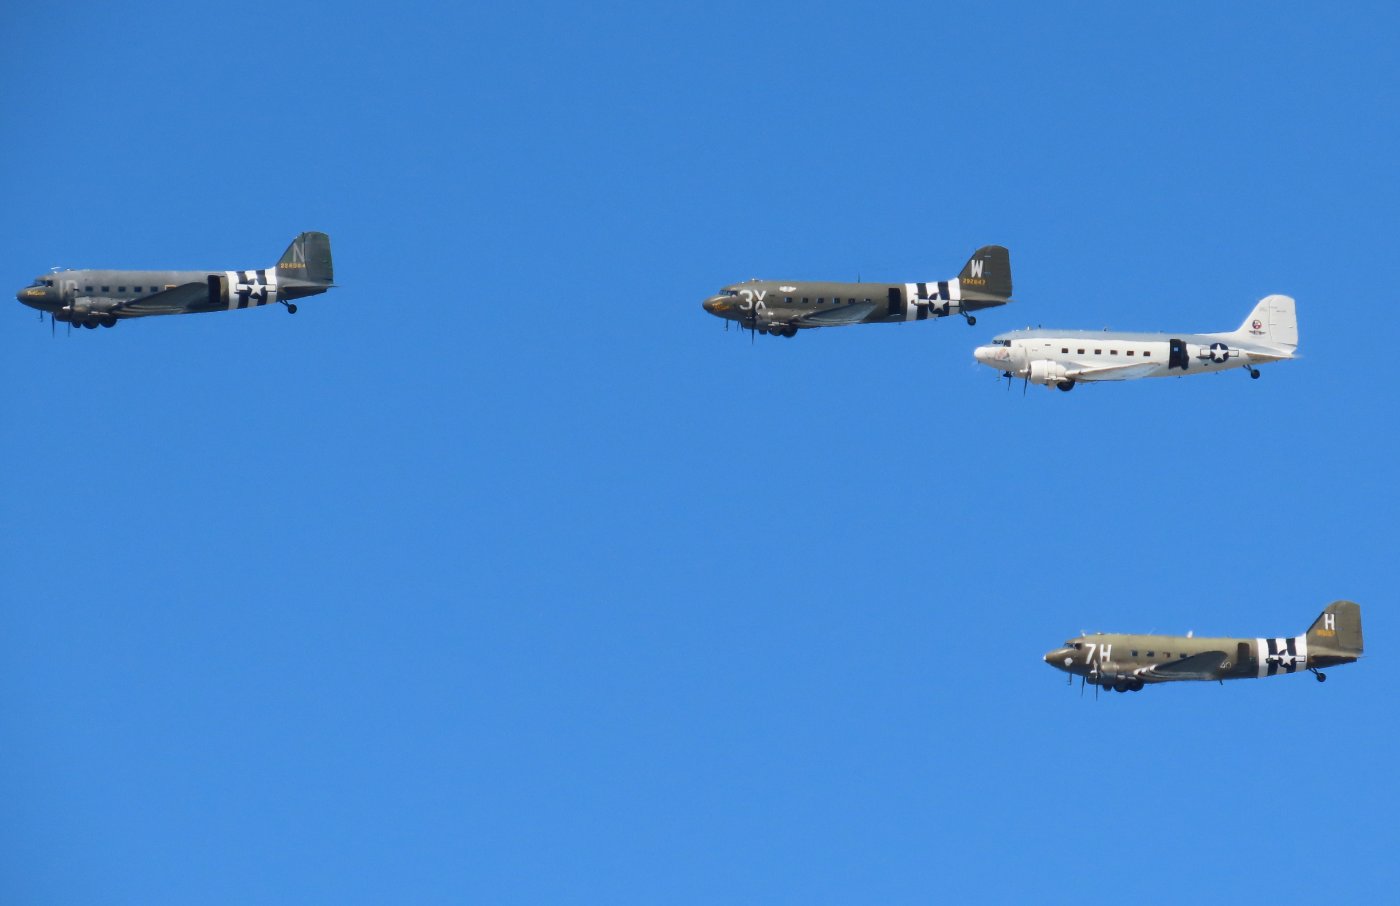 Three C-47s and a R4D